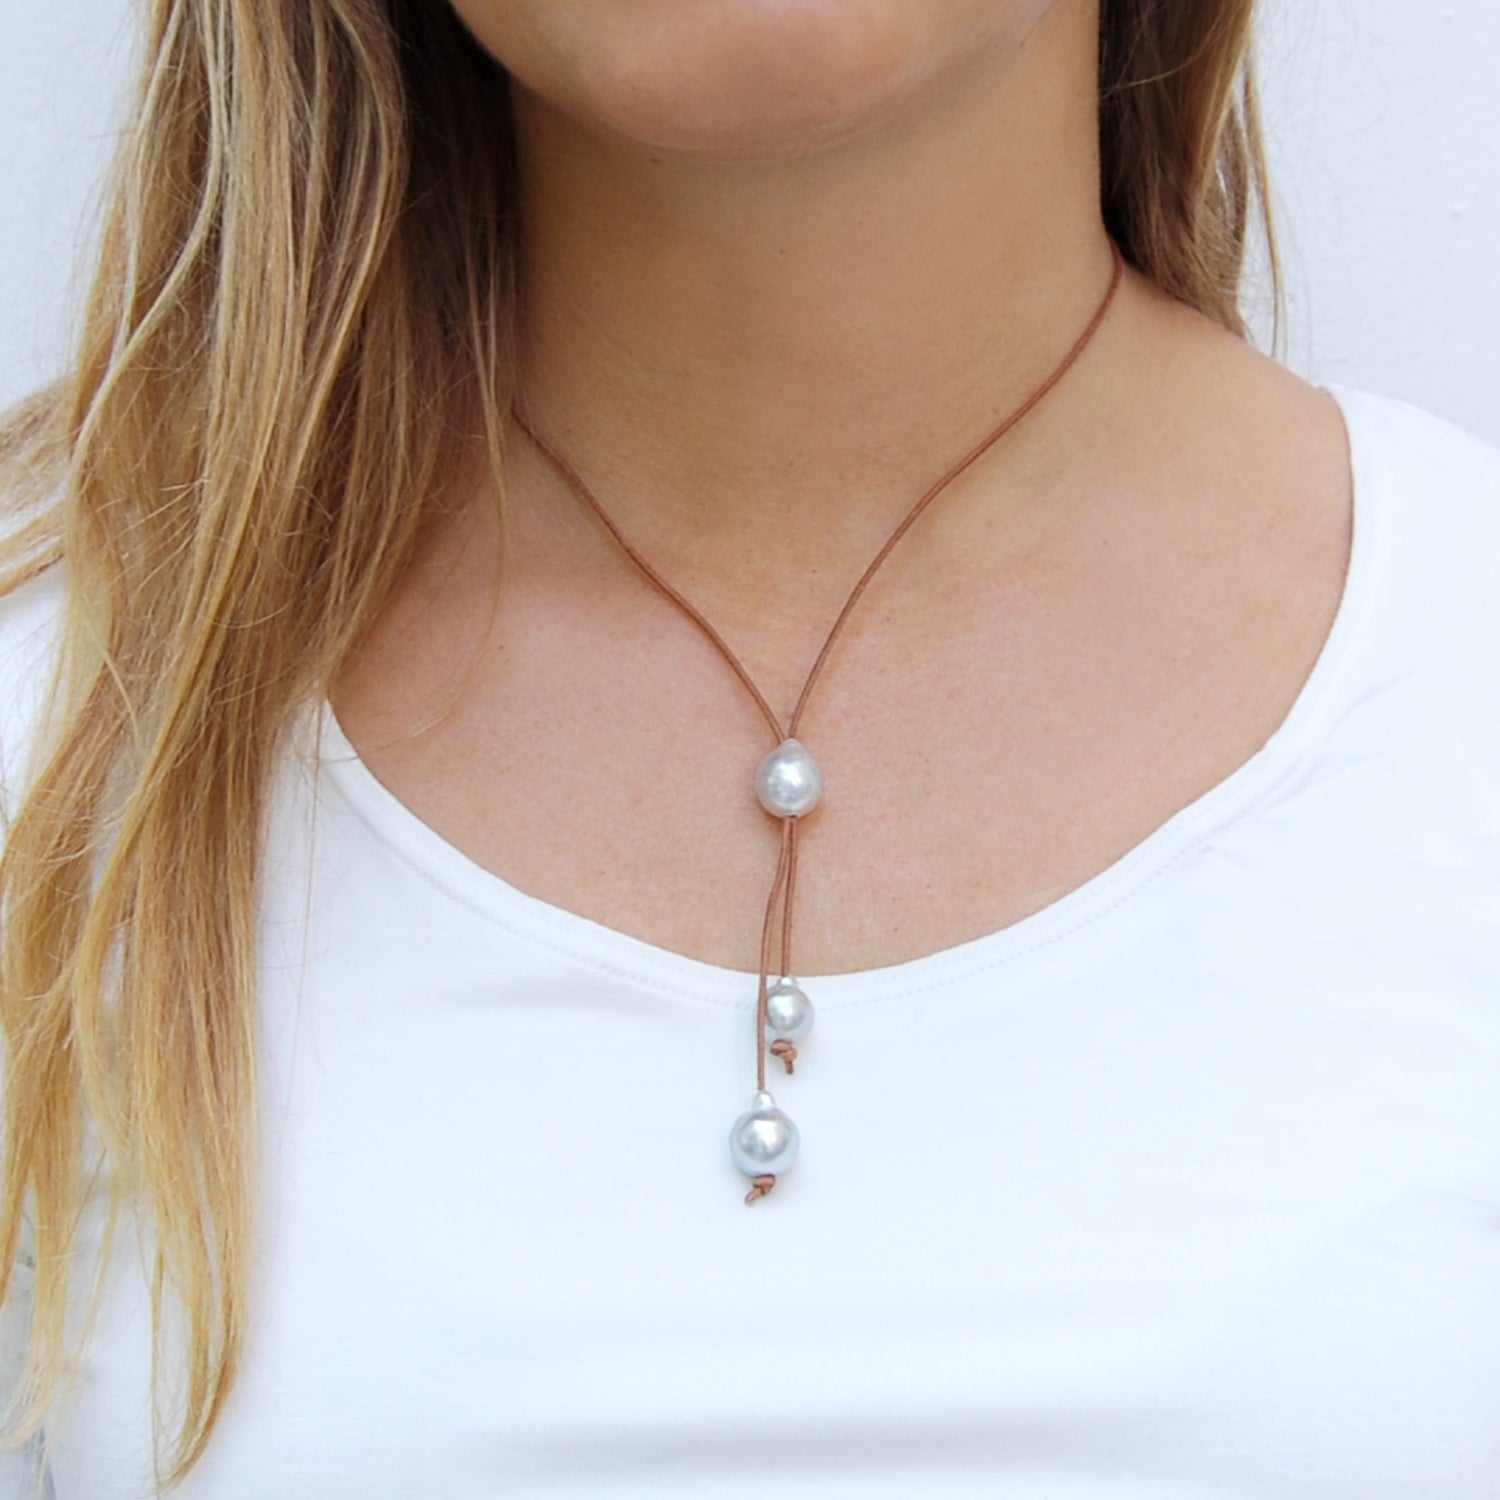 Raw Pale Tahitian Pearl Kiss Necklace in Tan and Pale Grey